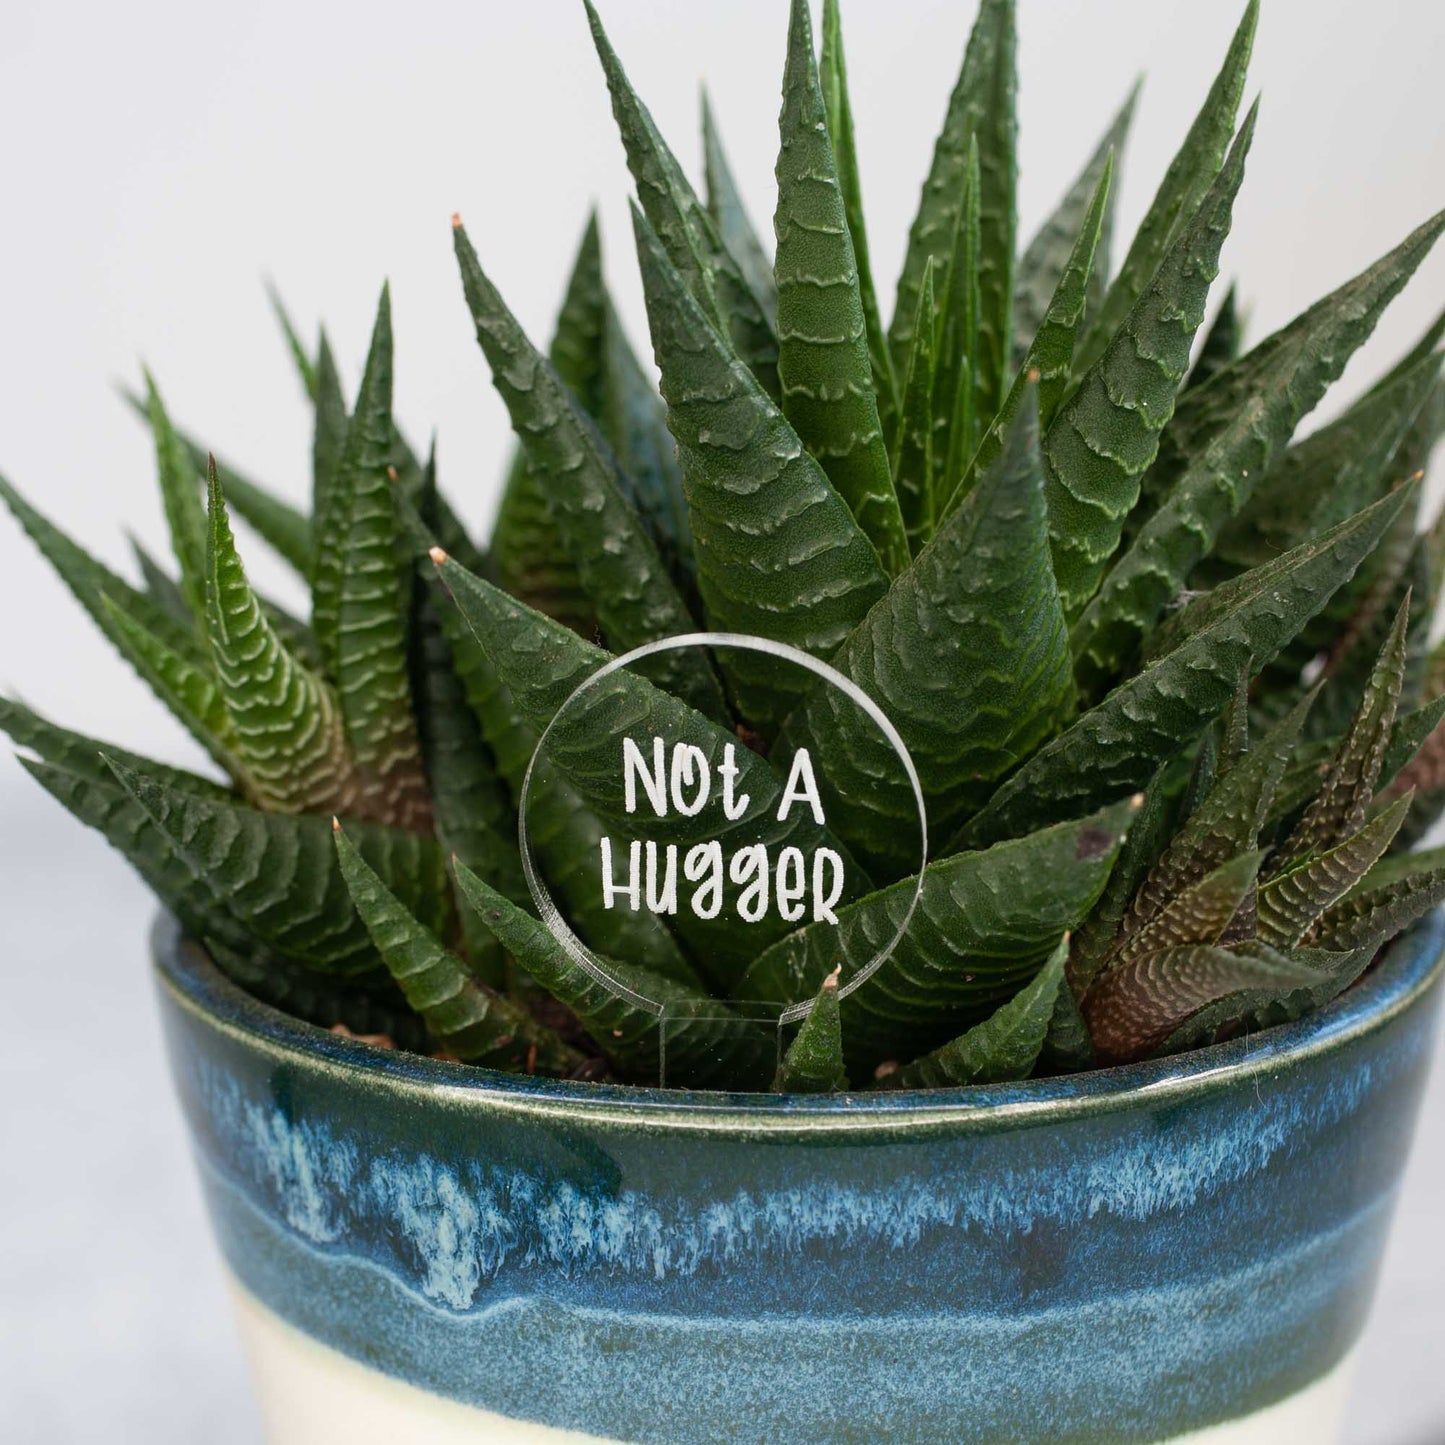 Funny Plant Markers - Laser Cut & Laser Engraved Clear Acrylic - "Not A Hugger" - by LeeMo Designs in Bend, Oregon